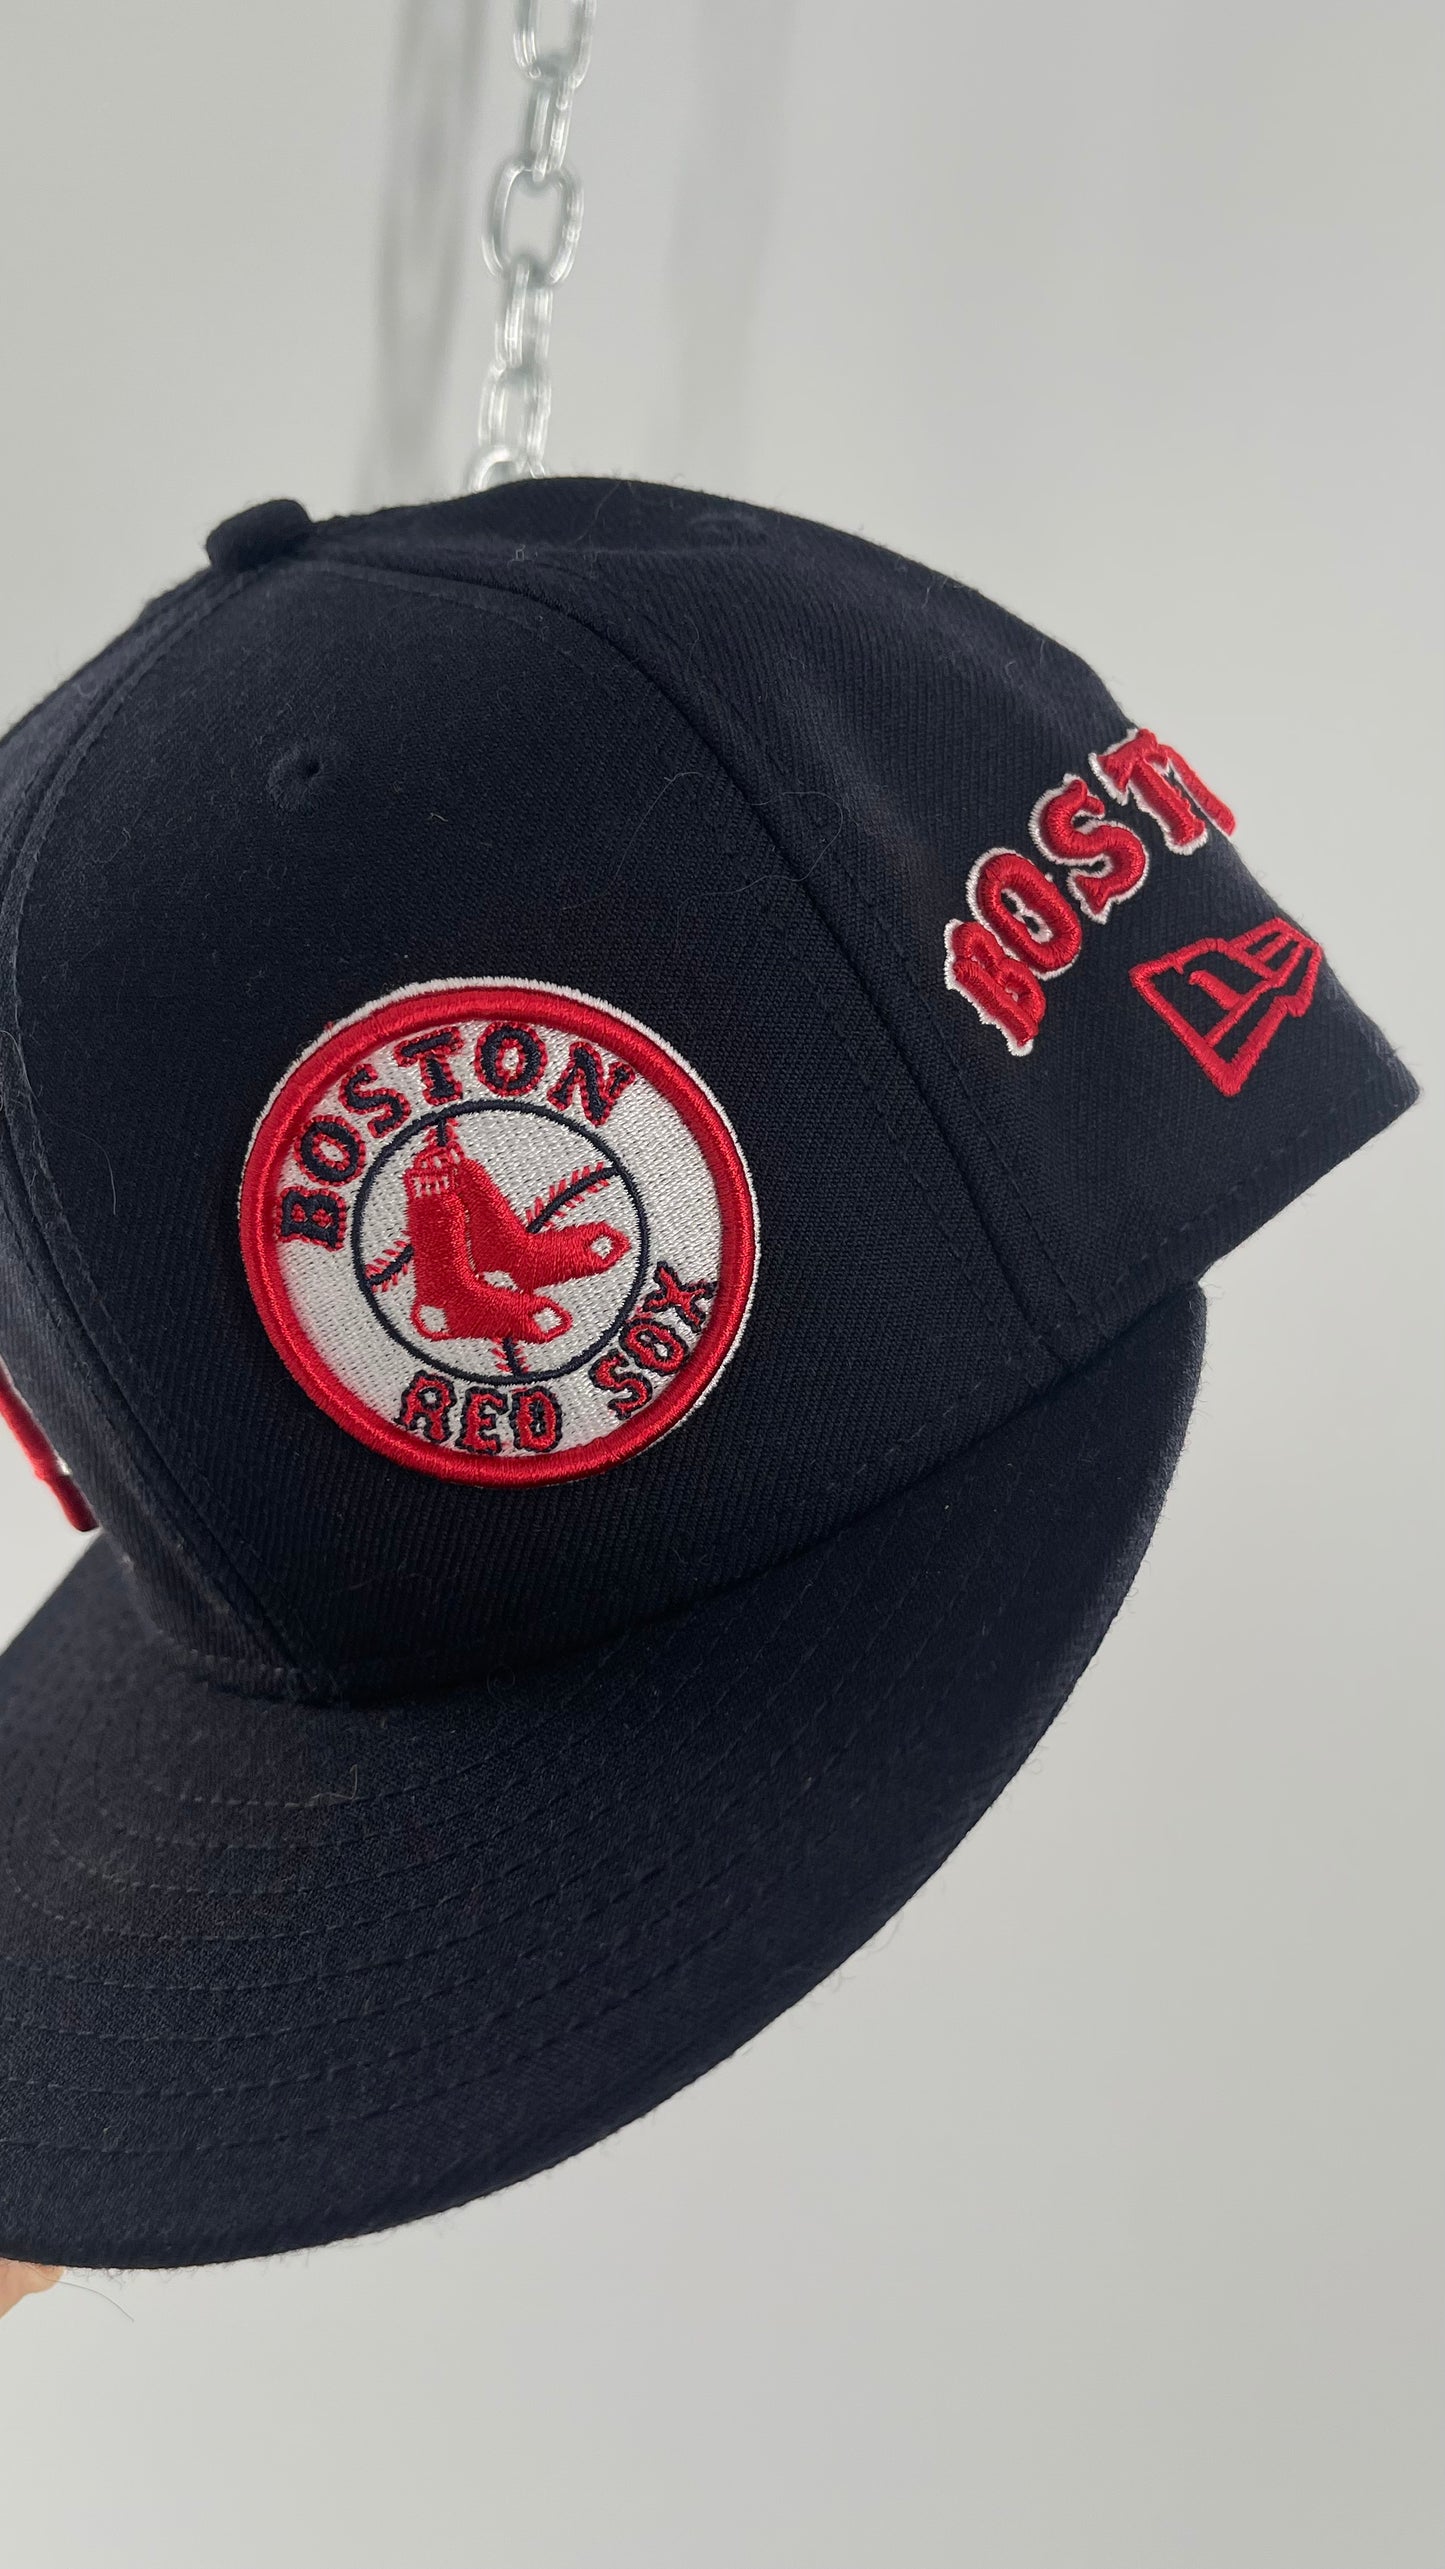 Vintage Embroidered Boston Red Sox Snap Back (7.5)